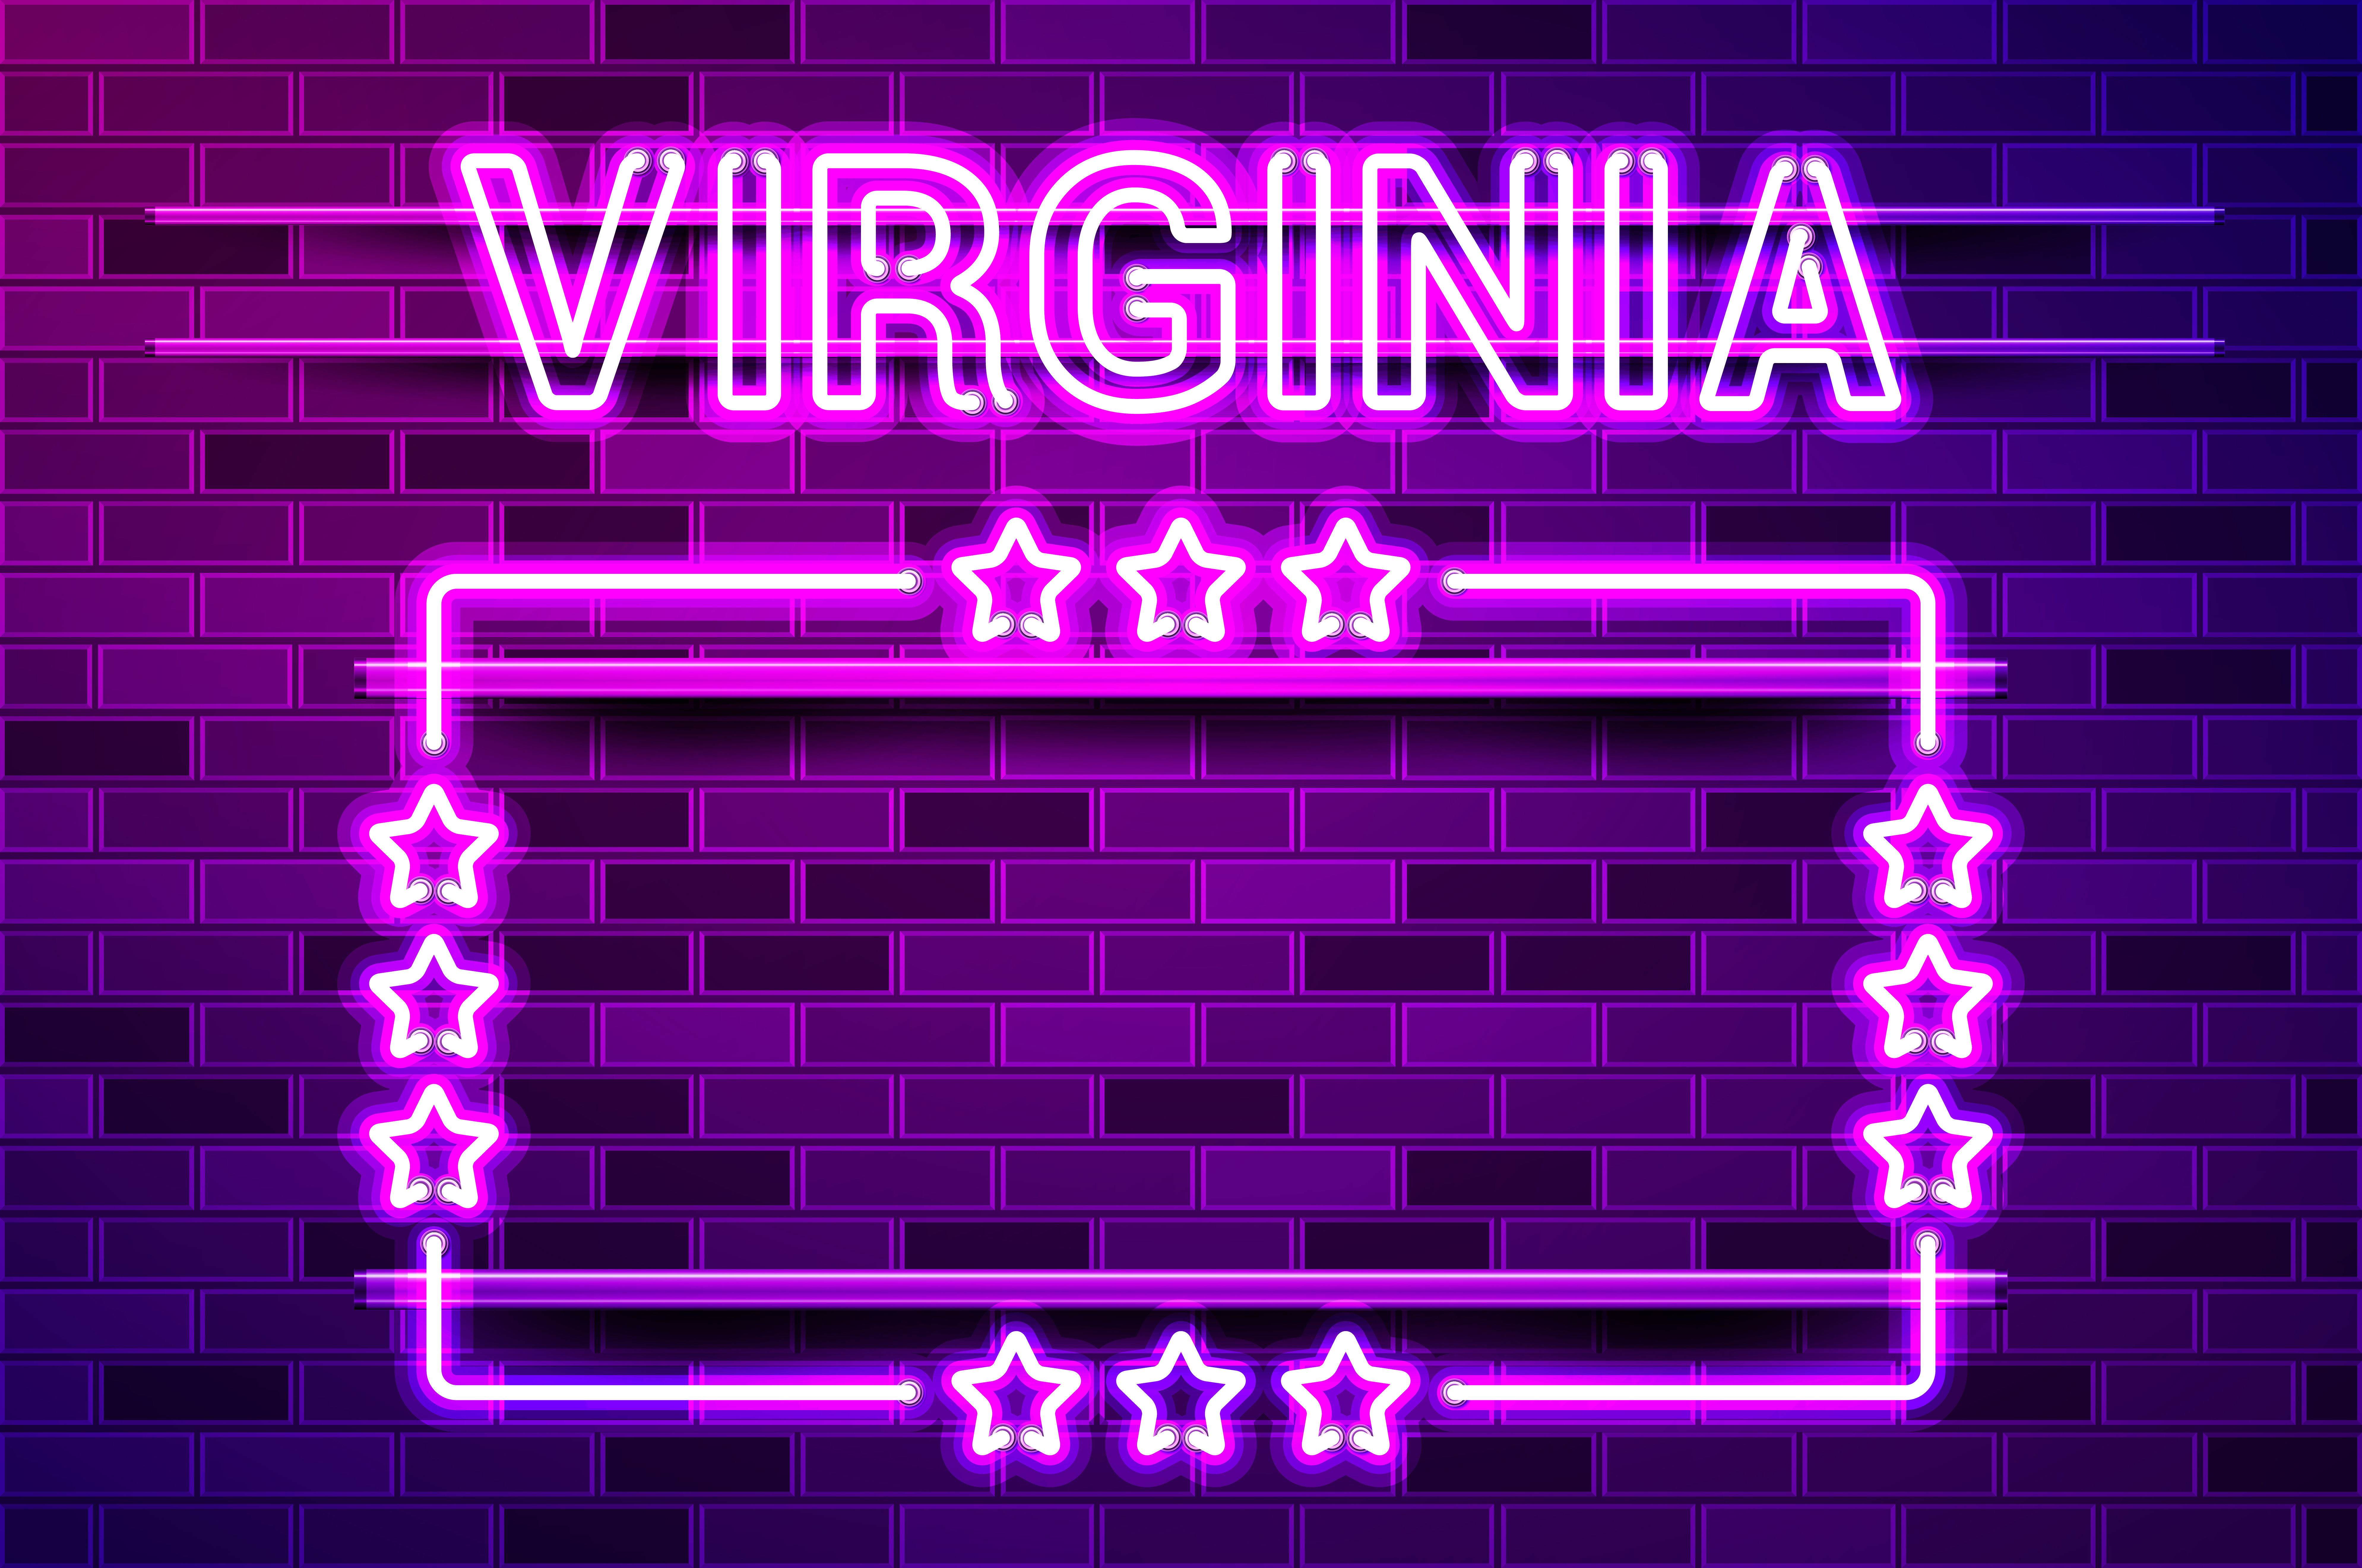 Virginia US State glowing purple neon lettering and a rectangular frame with stars. Realistic vector illustration. Purple brick wall, violet glow, metal holders.. Virginia US State glowing purple neon lettering and a rectangular frame with stars